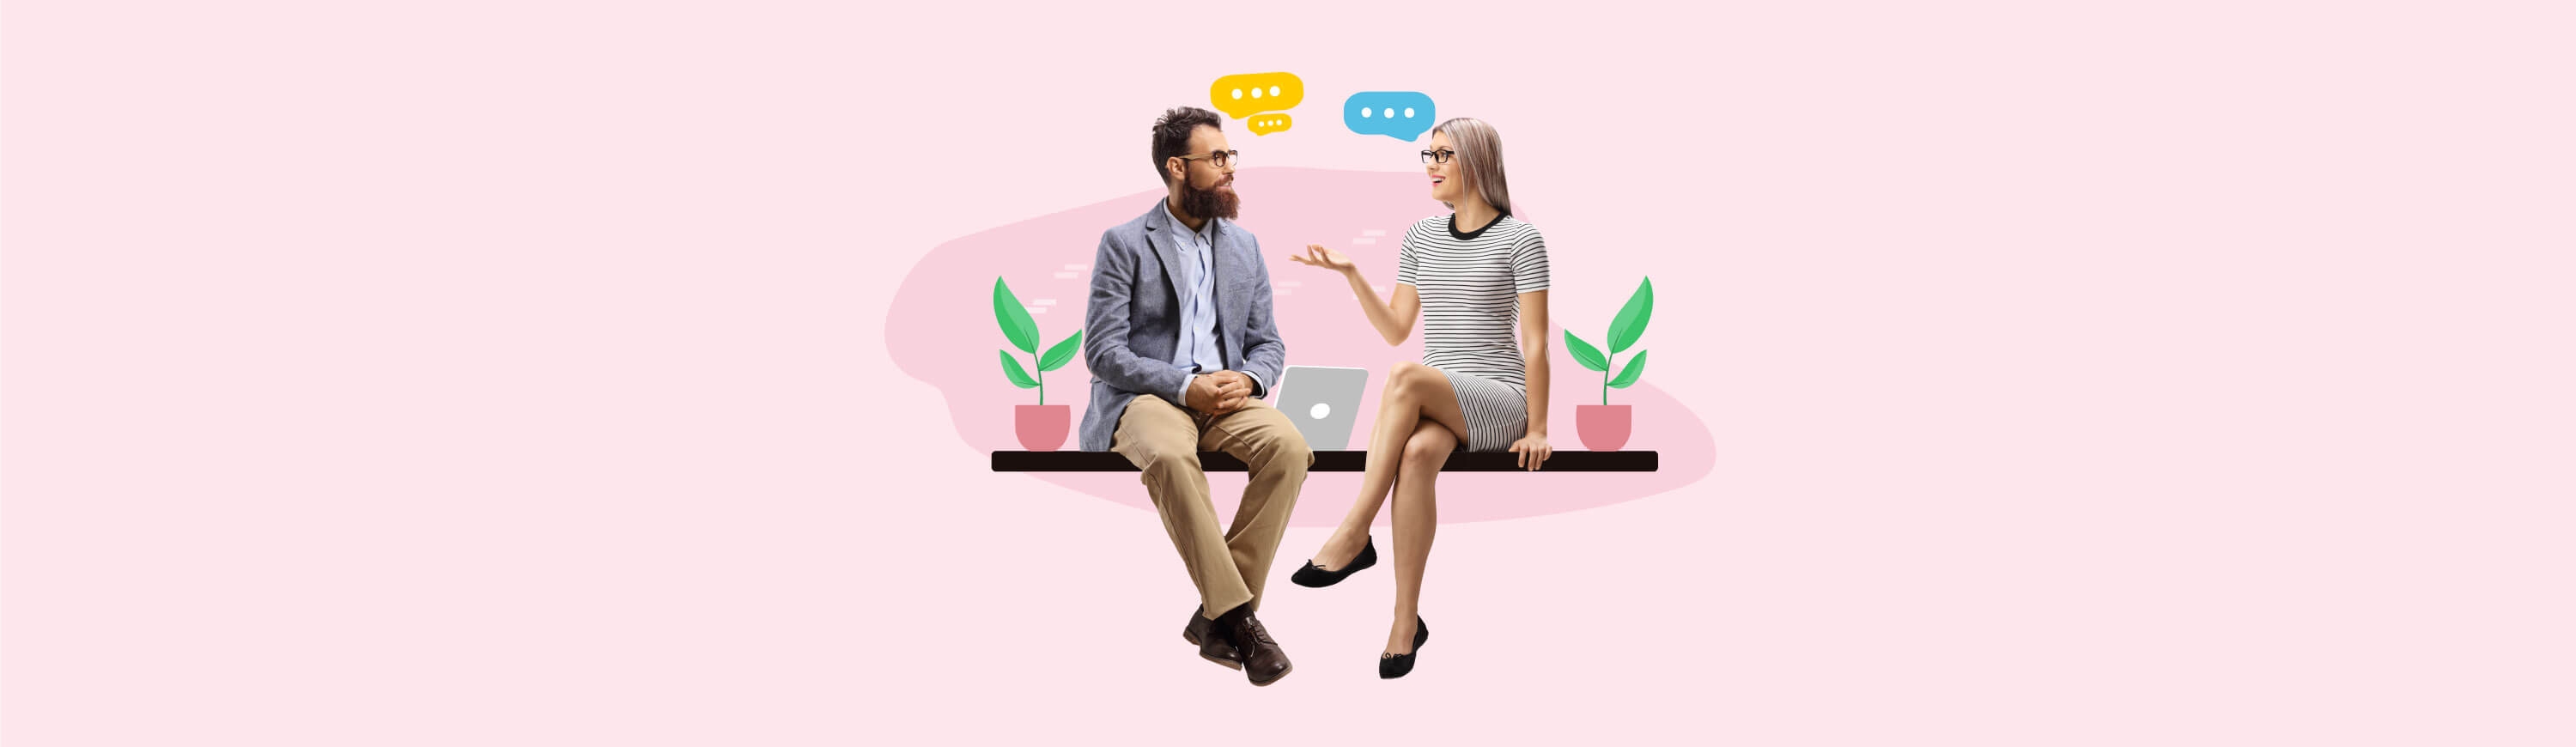 Illustration of a man and woman sitting together with a laptop, smiling while having a conversation.